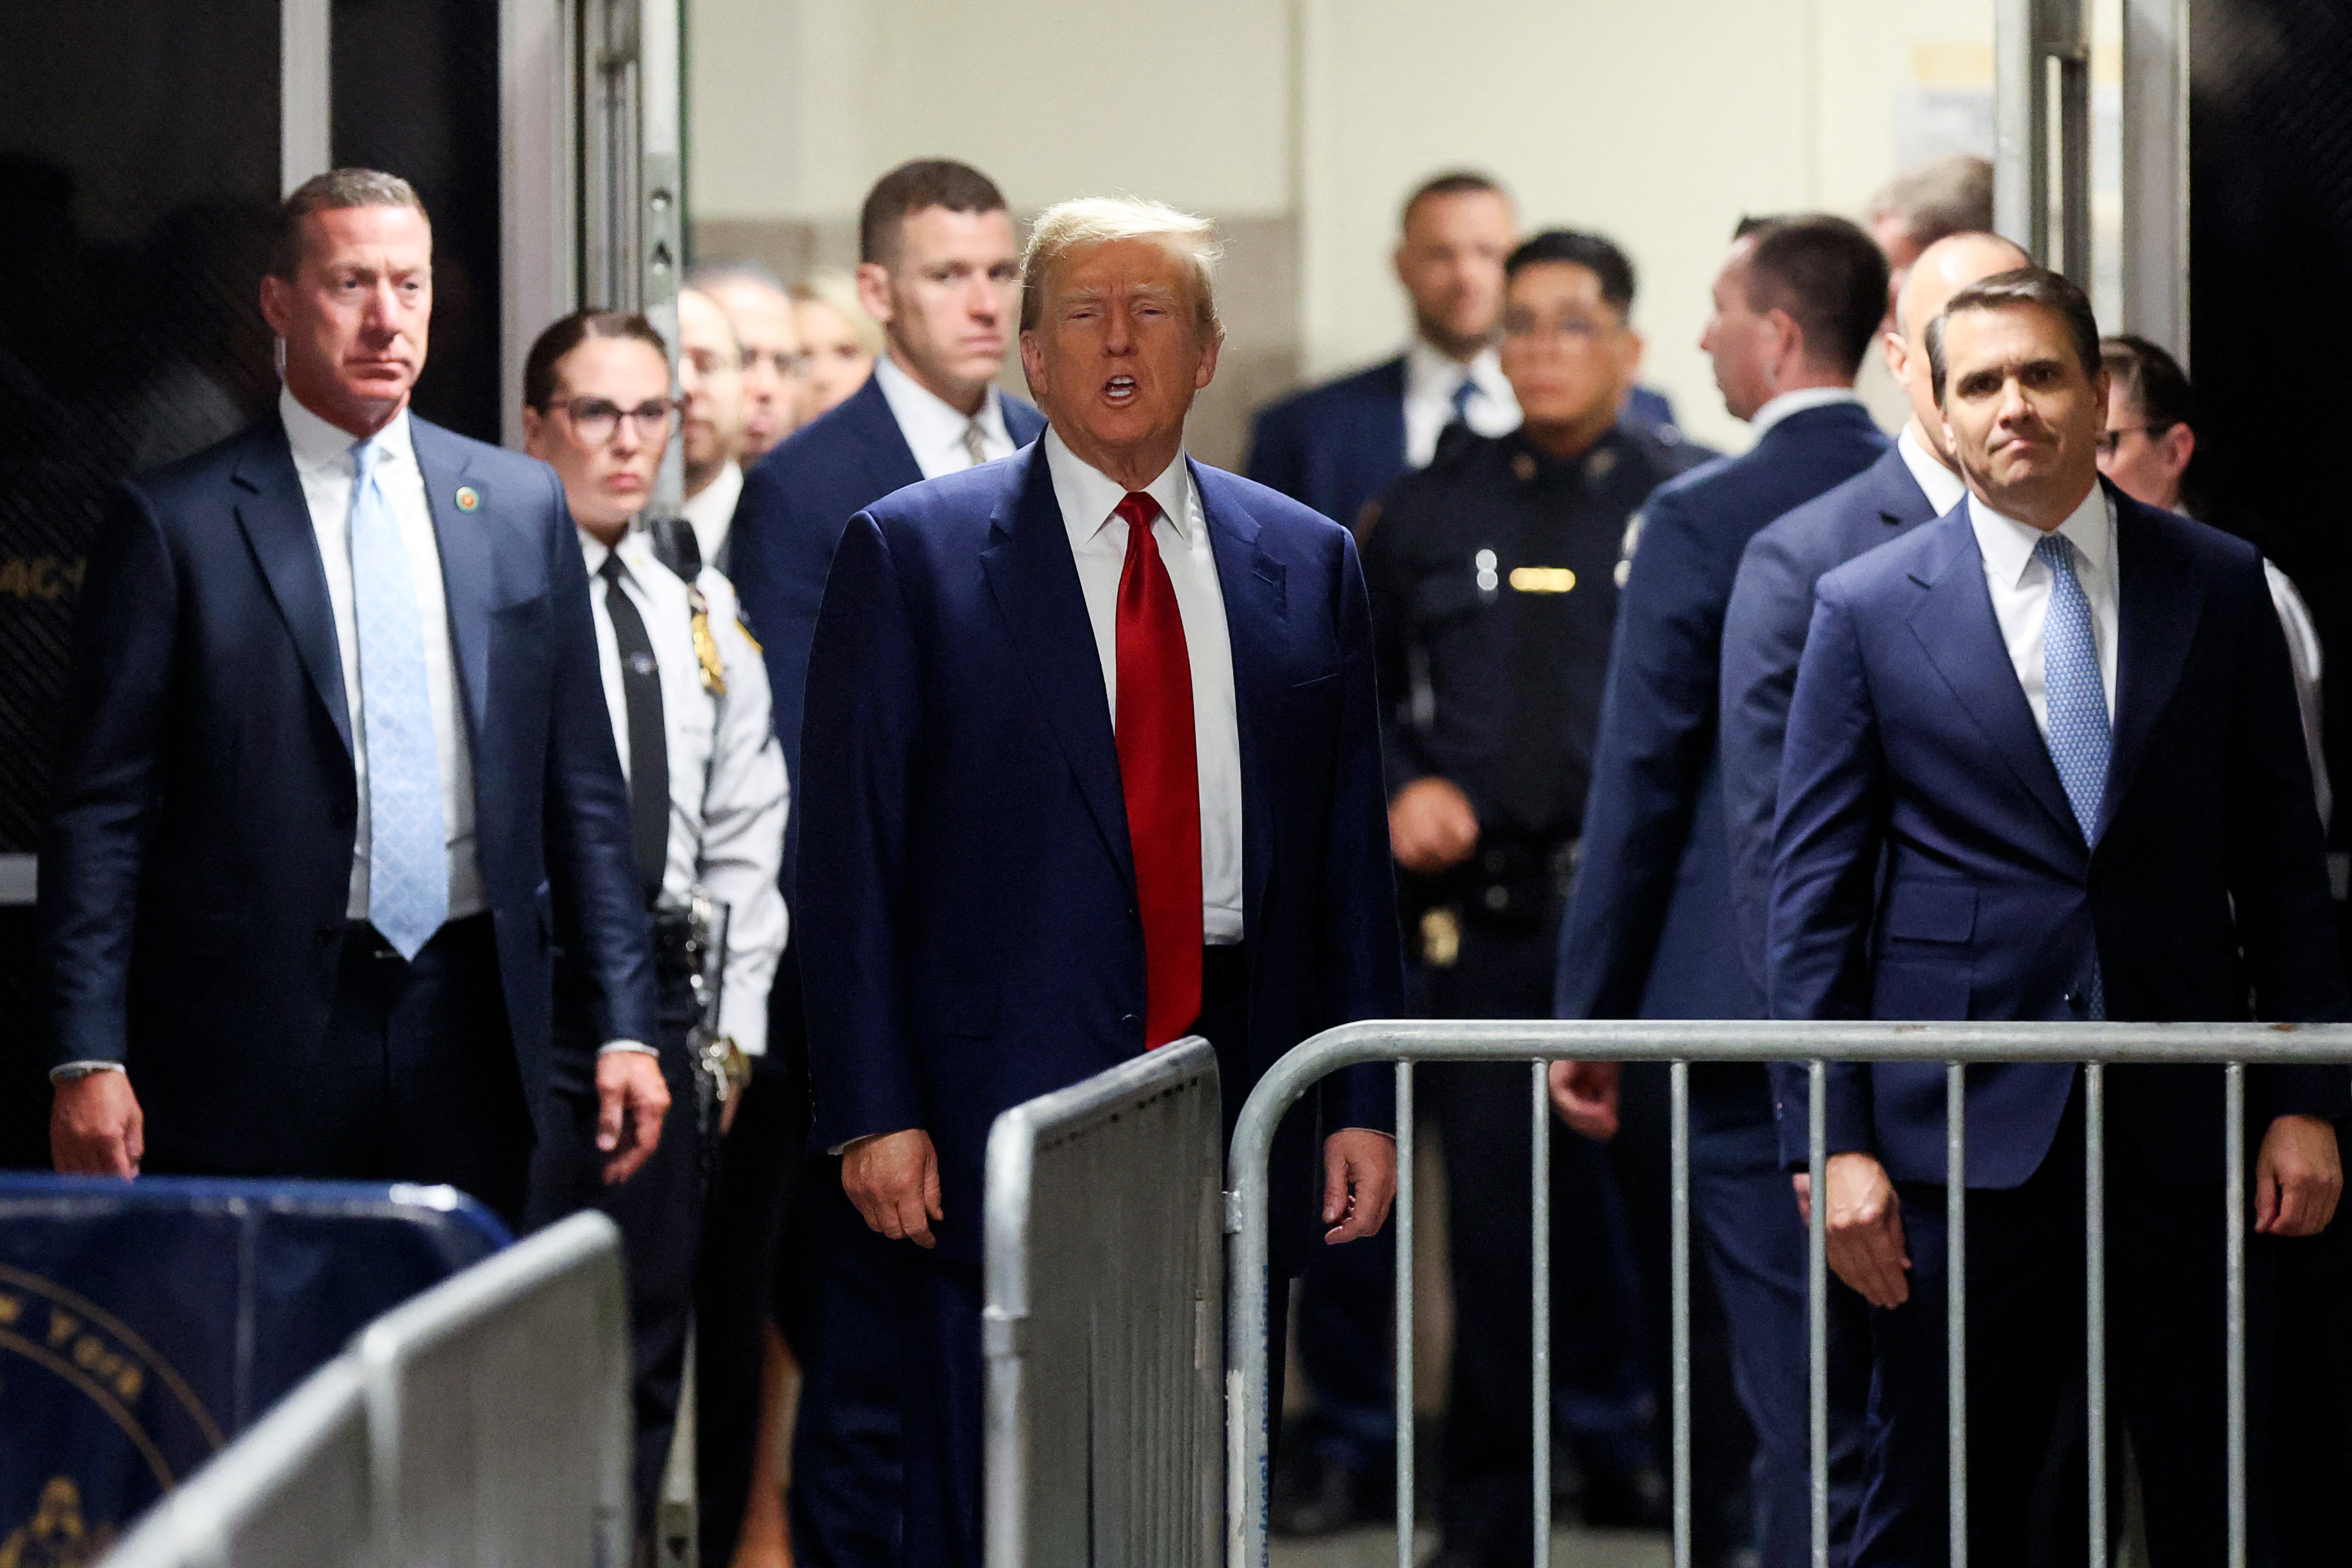 Donald Trump speaks to reporters outside a criminal courtroom doors in Manhattan on 25 March.